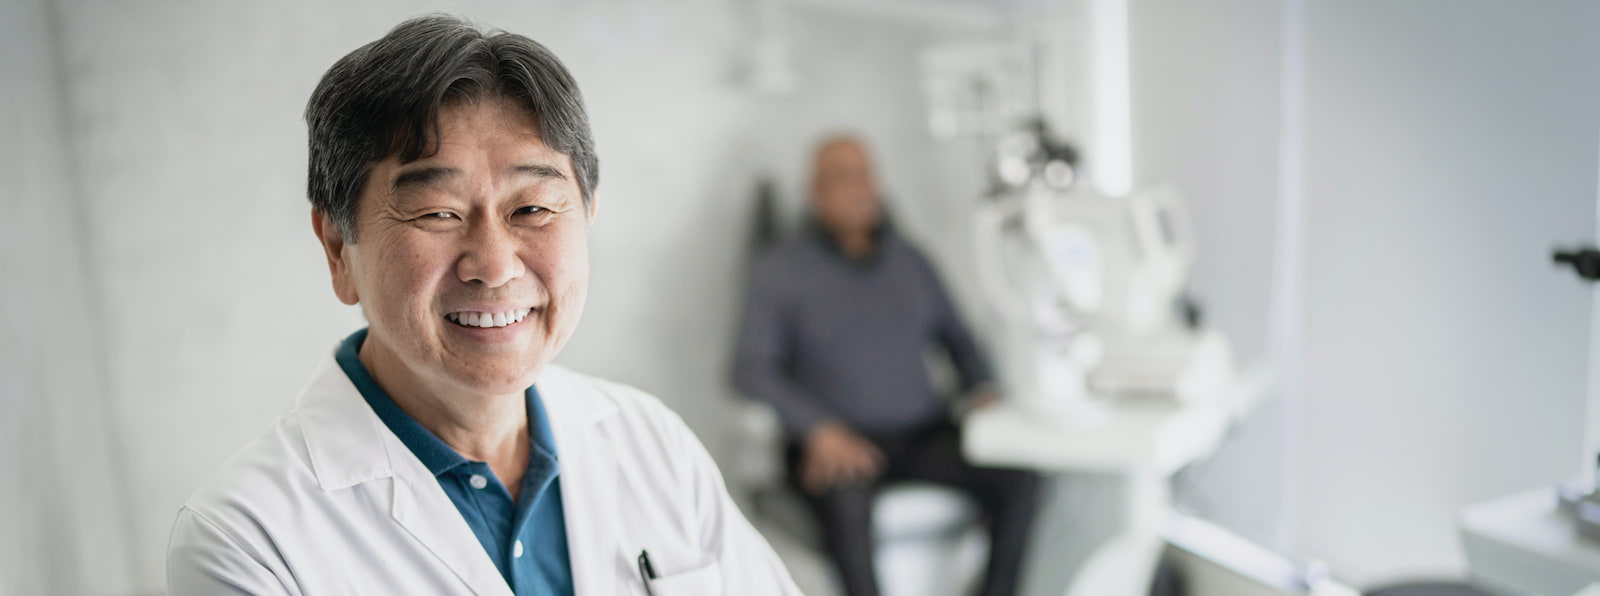 physician smiling with patient in the background